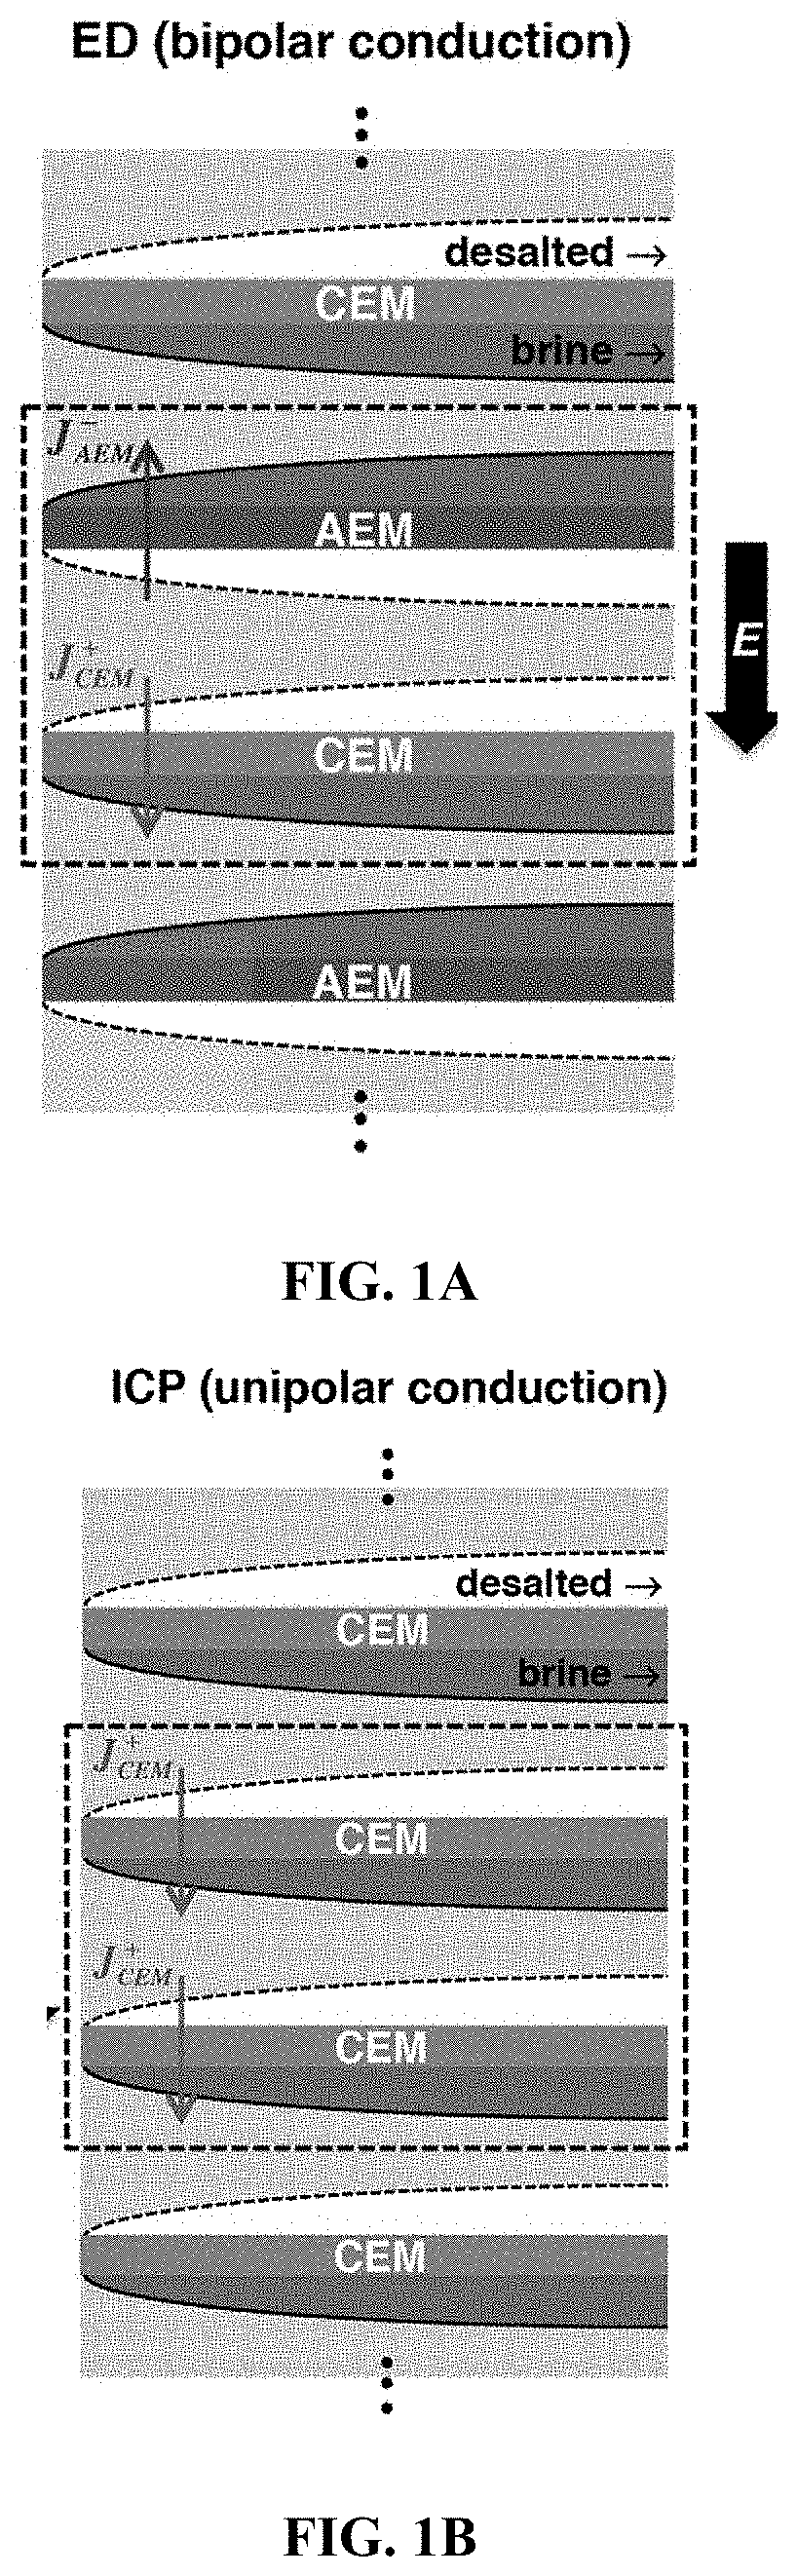 Return flow system for ion concentration polarization (ICP) desalination